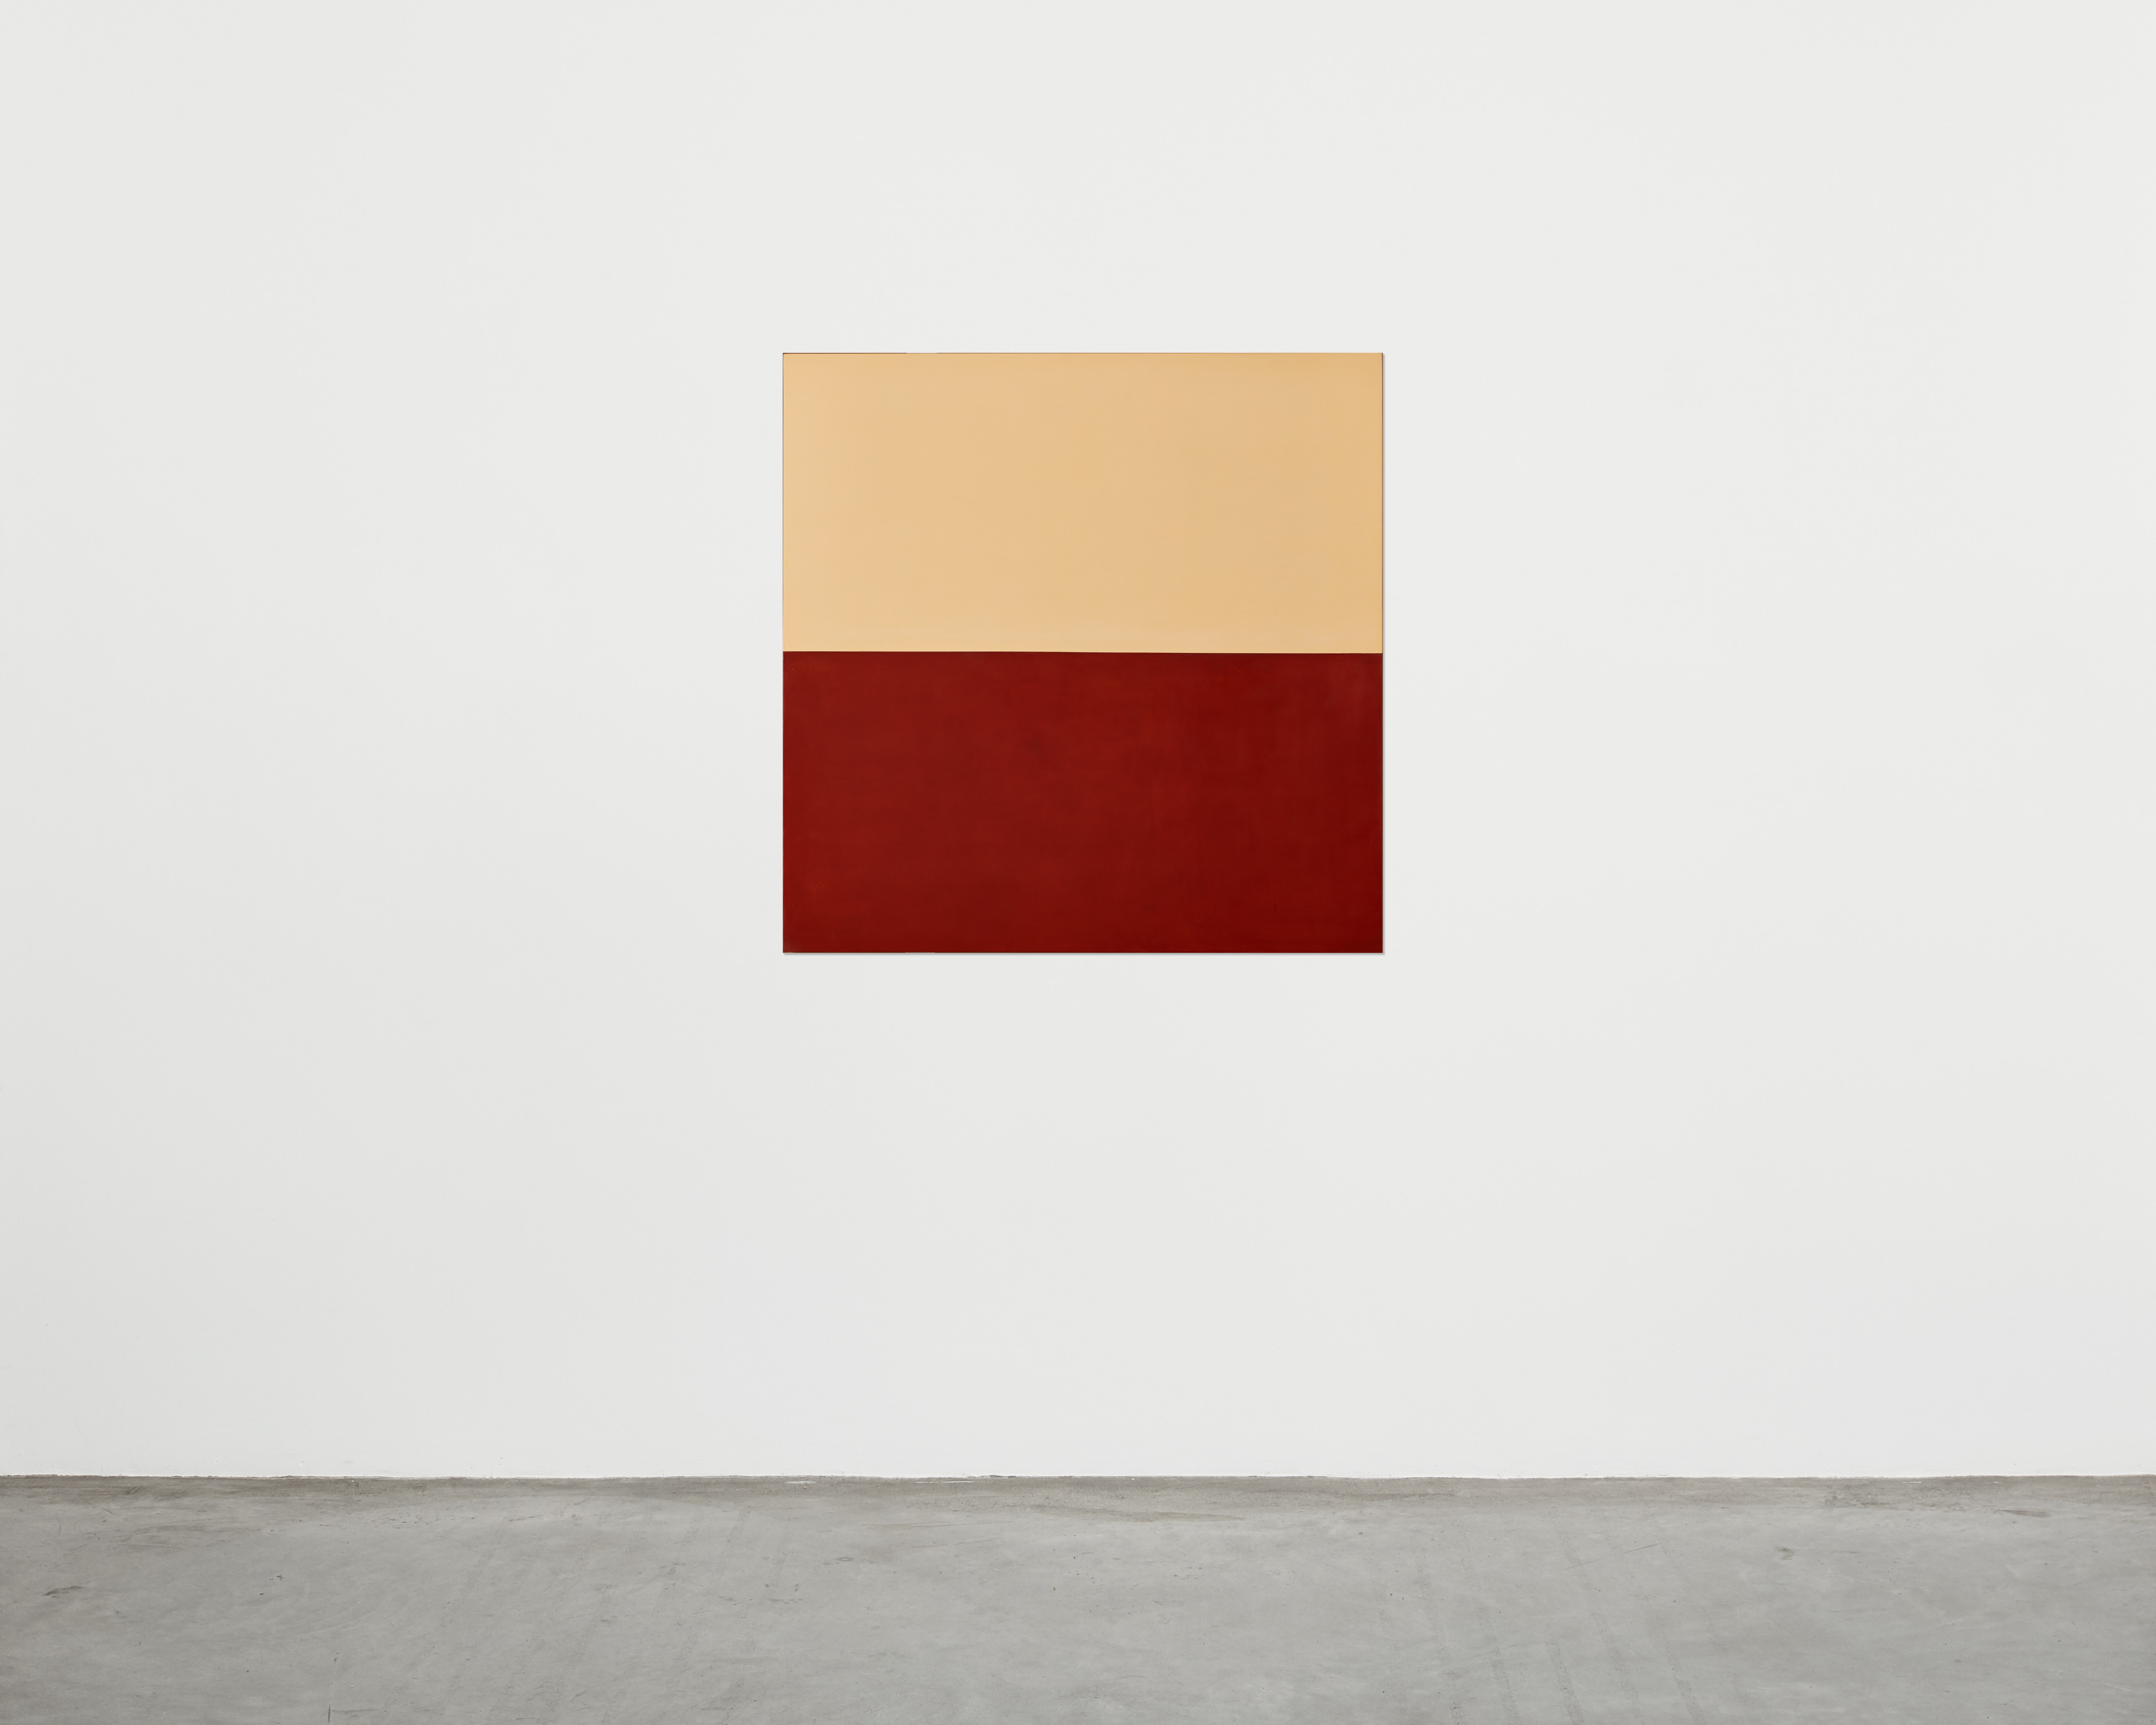 Paolo Serra  Untitled, 2017  lacquer and gold leaf on panel 100 x 100 cm